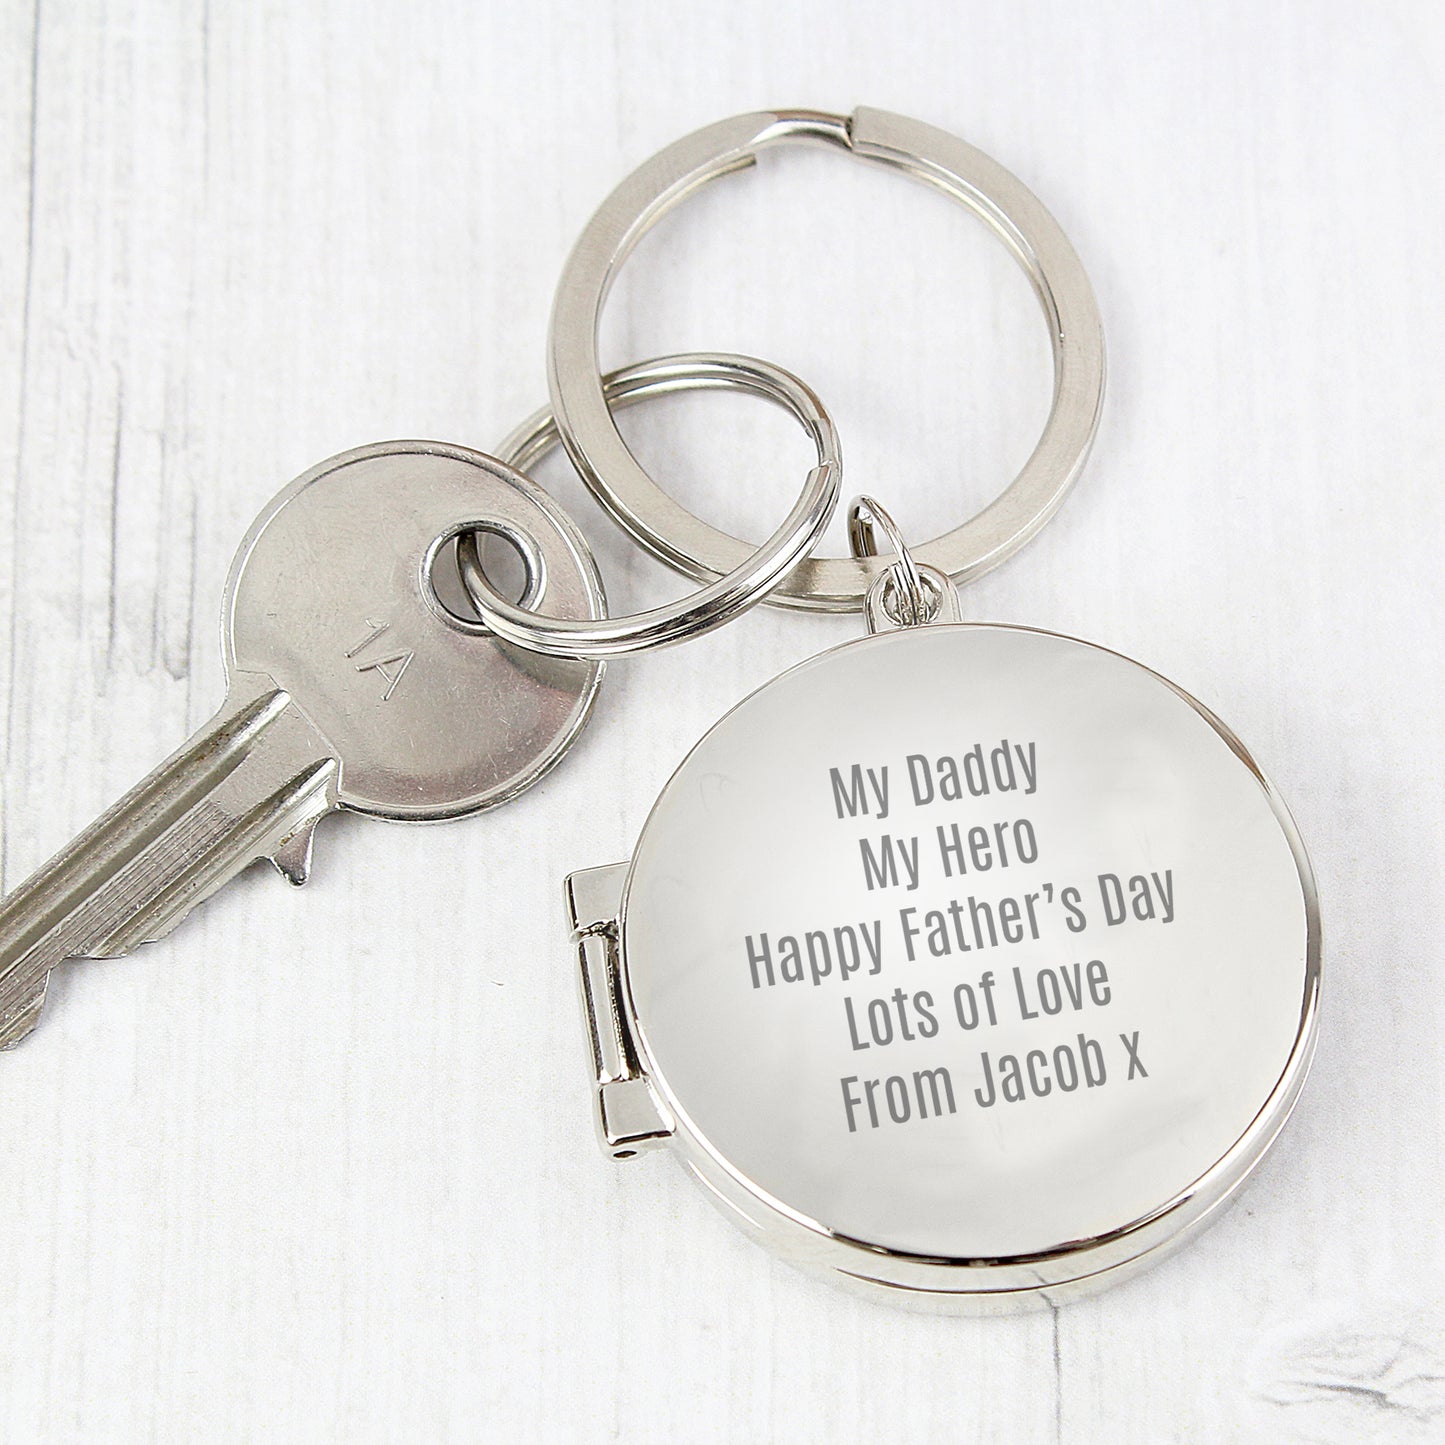 Round chrome locket keyring engraved with your own message - for Fathers Day or any occasion